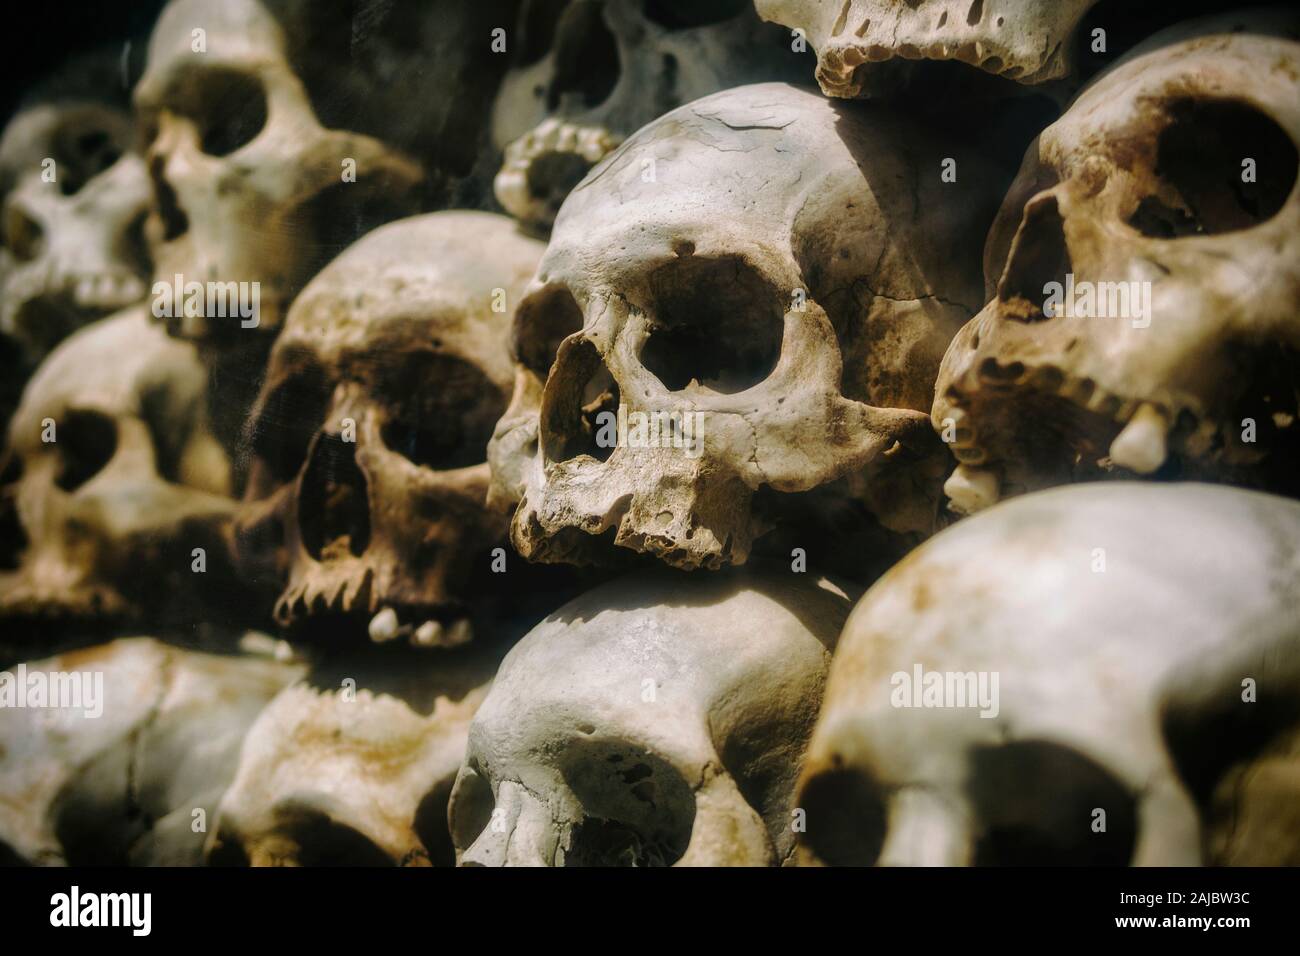 Human skulls of victims of the Khmer Rouge stacked at the Killing Fields of Choeung Ek memorial, Phnom Penh, Cambodia. Stock Photo